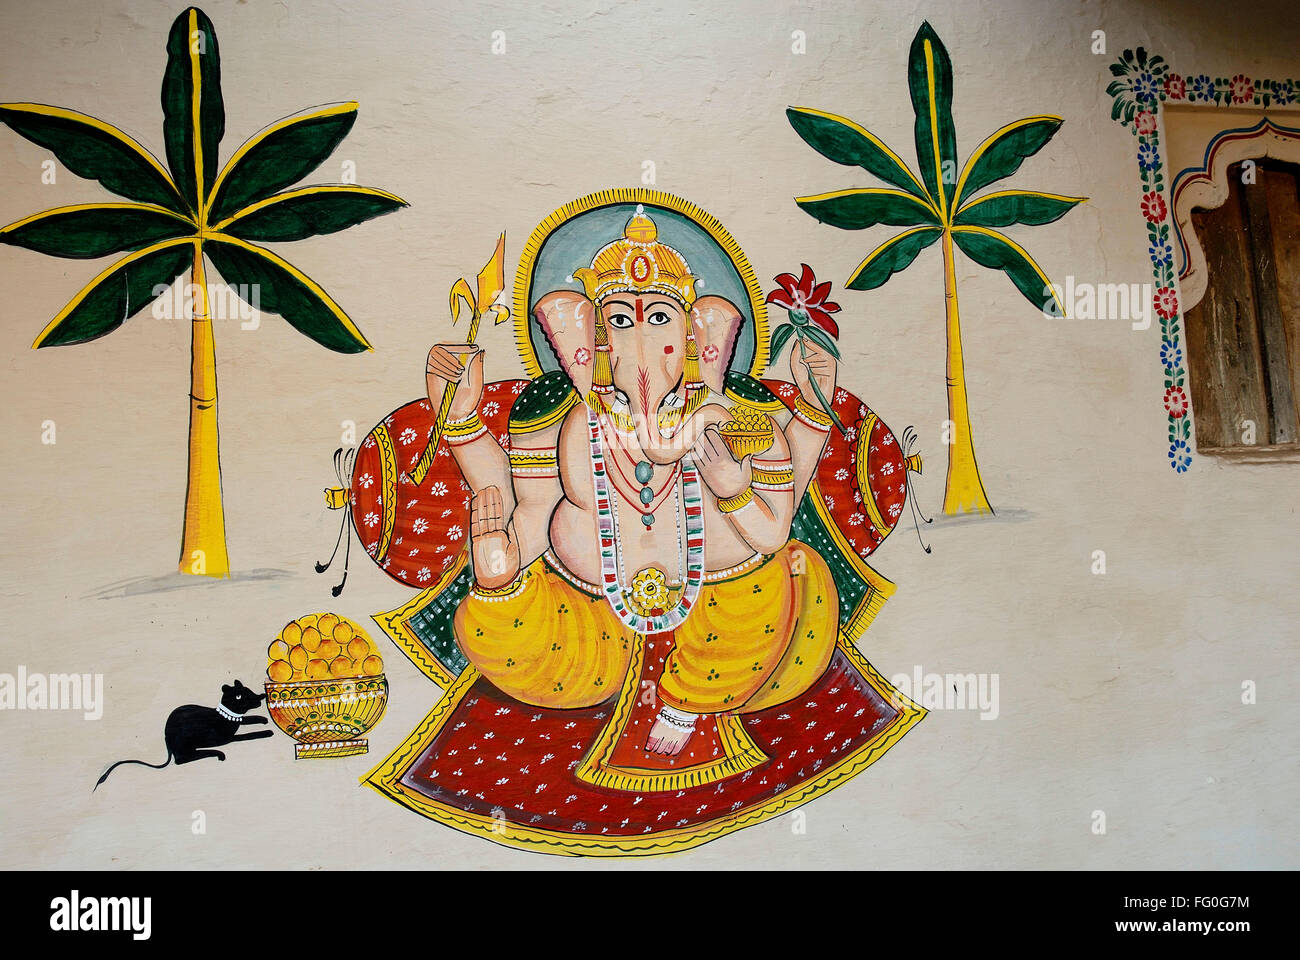 Ganpati Painting High Resolution Stock Photography And Images Alamy This be the elephant god. https www alamy com stock photo lord ganesh ganpati mewad wall painting at shilpagram udaipur rajasthan 95899096 html